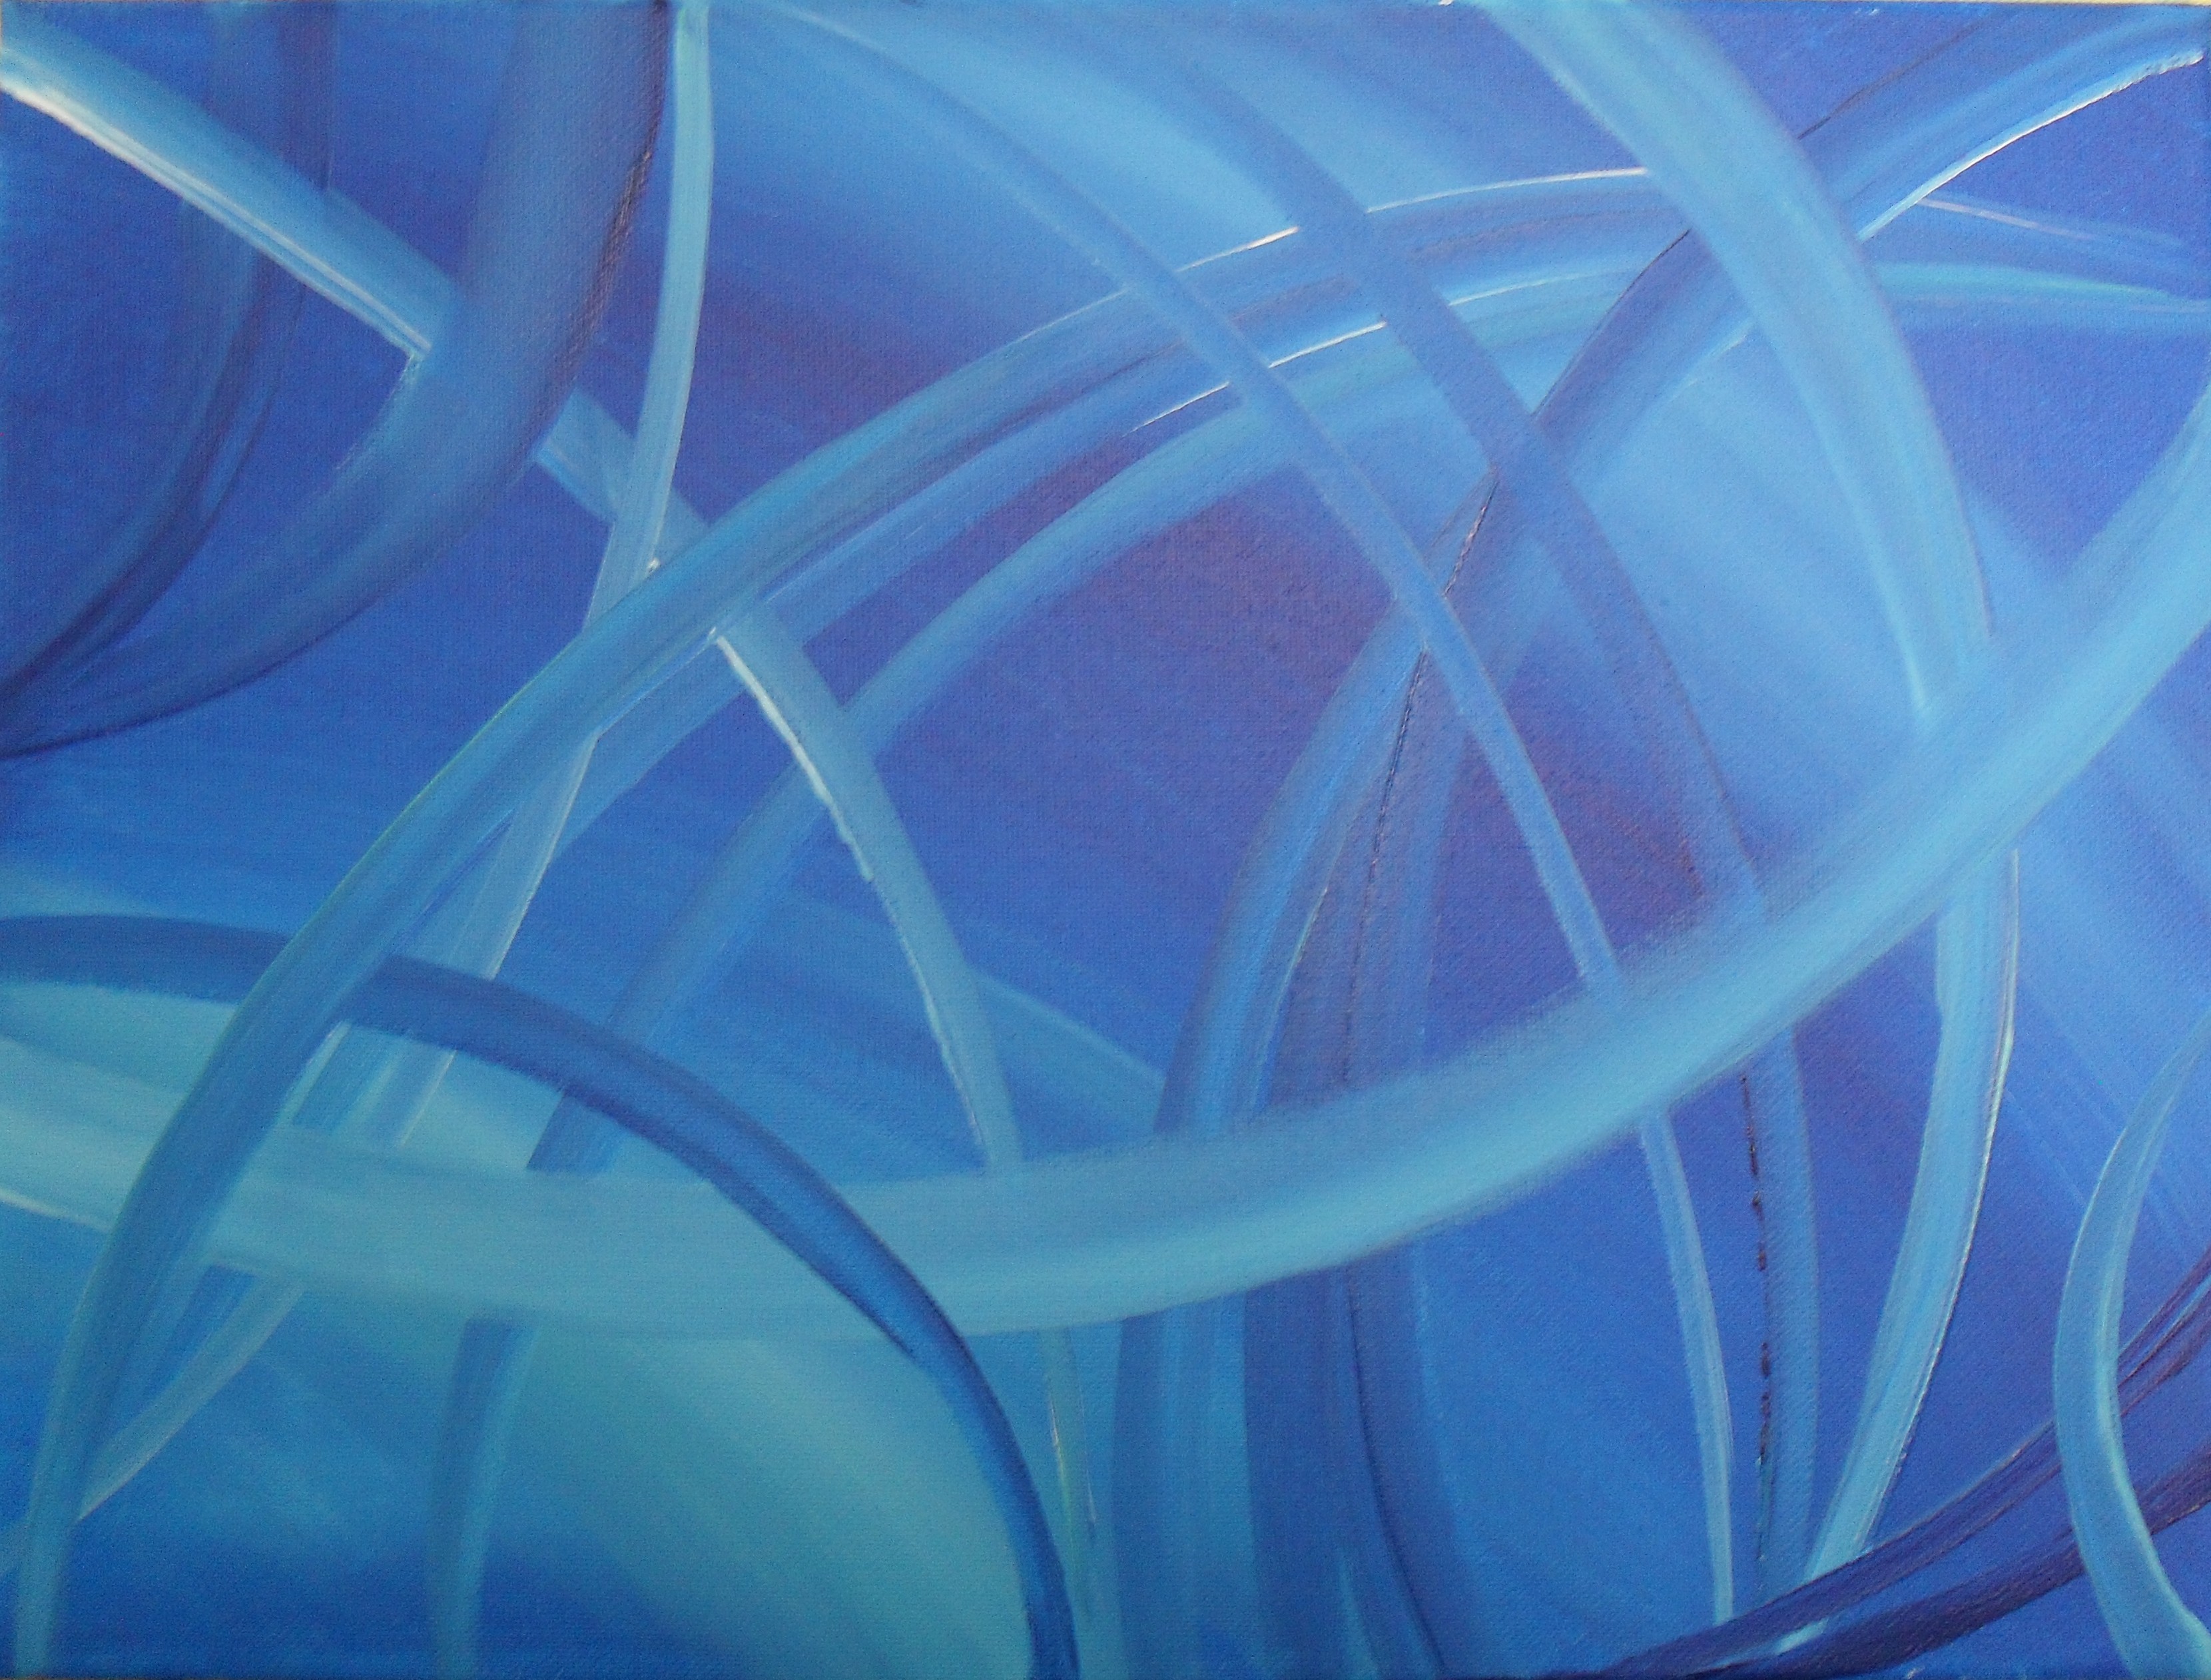 Blue Shapes Acrylic painting on canvas, 40x30cm. Shades and round shapes blue in blue by Lia van Elffenbrinck